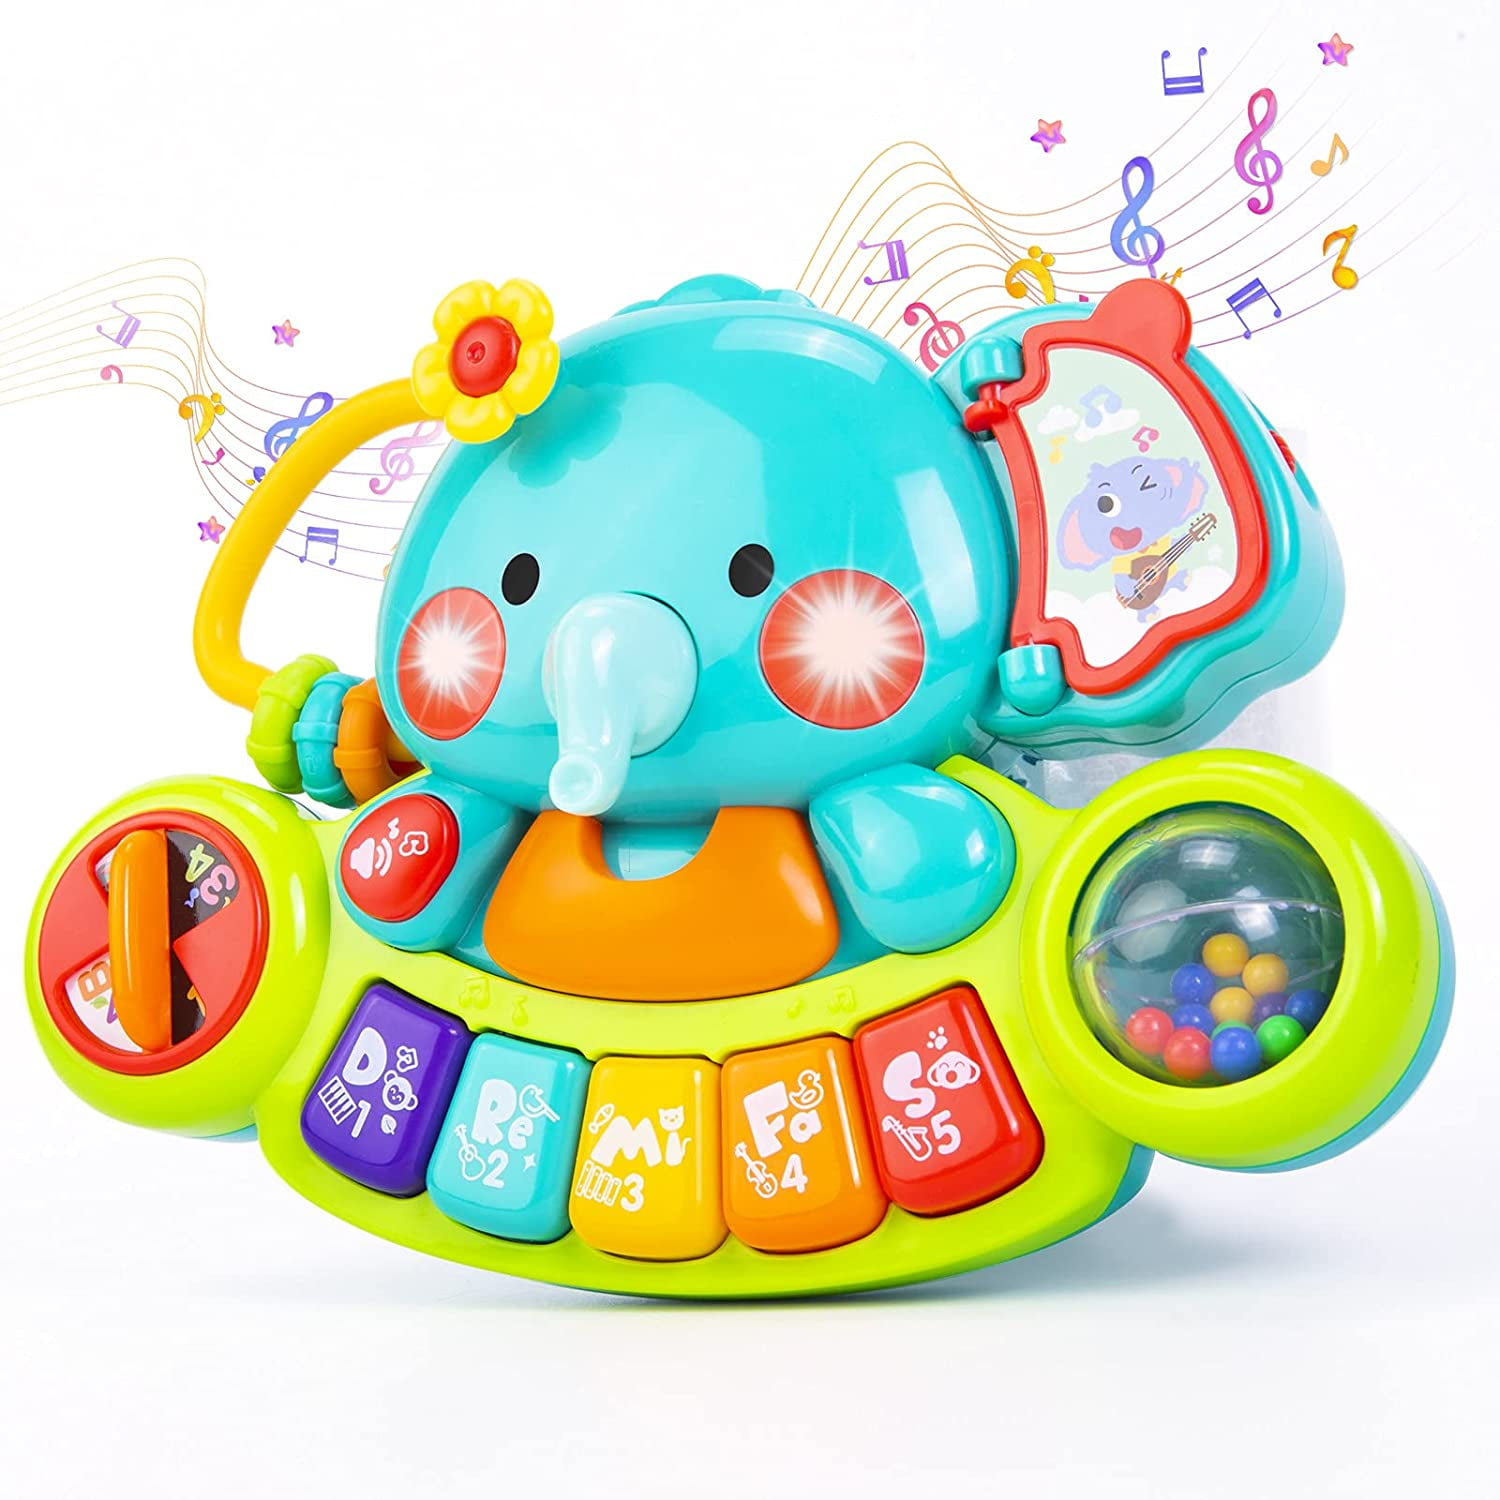 Hot Baby Kids Sound Music Gift Toddler Rattle Musical Wooden Intelligent Toys 